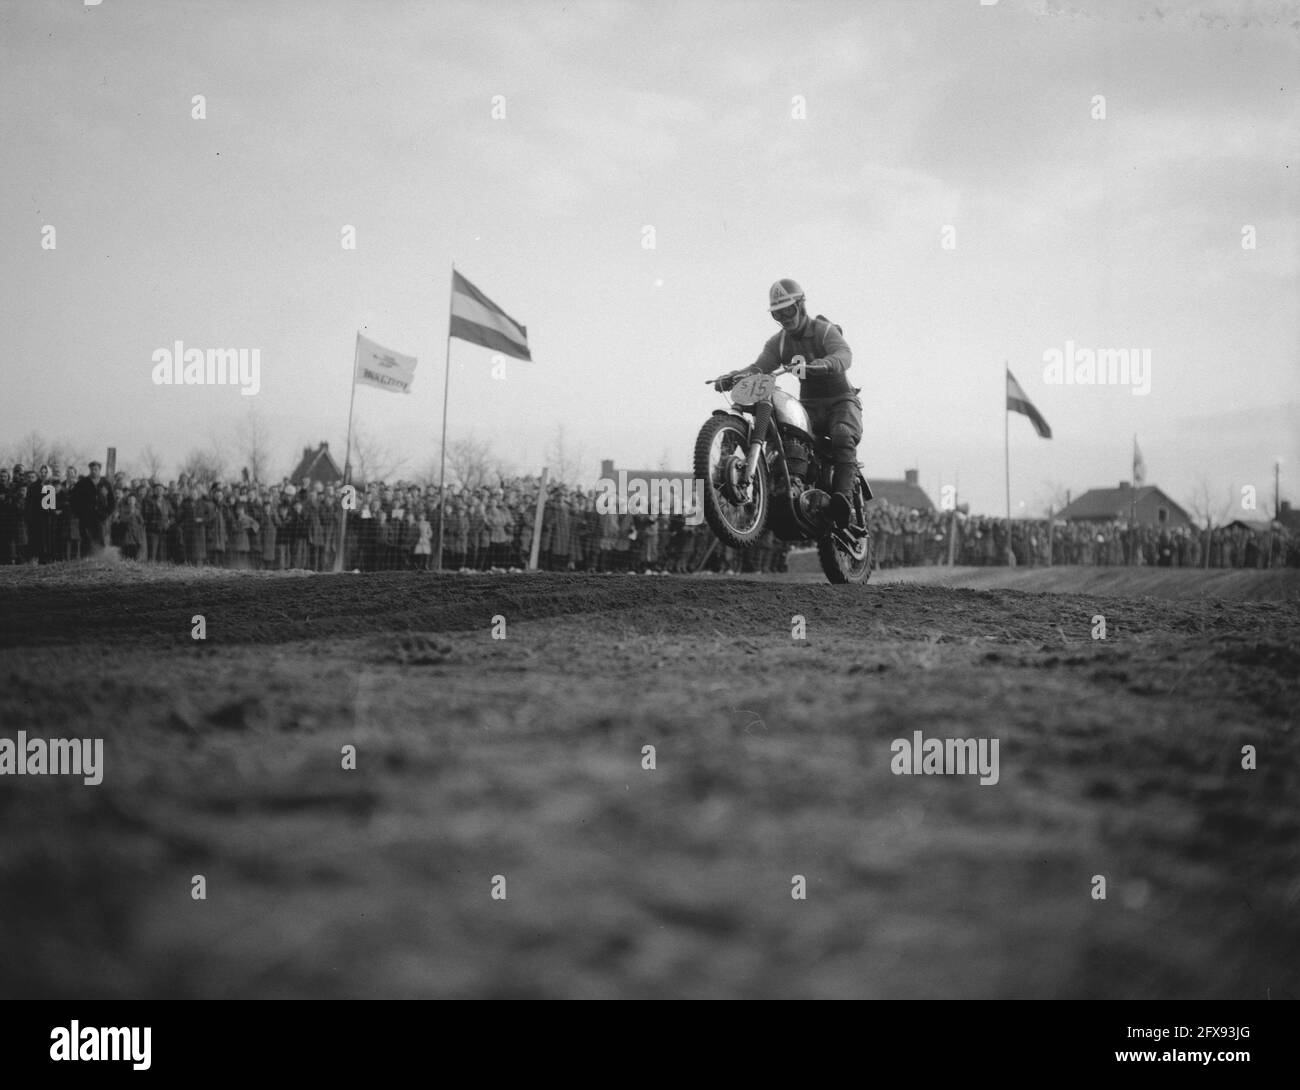 Bill Milsson (Sweden on Cresent), March 16, 1958, motocross, The Netherlands, 20th century press agency photo, news to remember, documentary, historic photography 1945-1990, visual stories, human history of the Twentieth Century, capturing moments in time Stock Photo